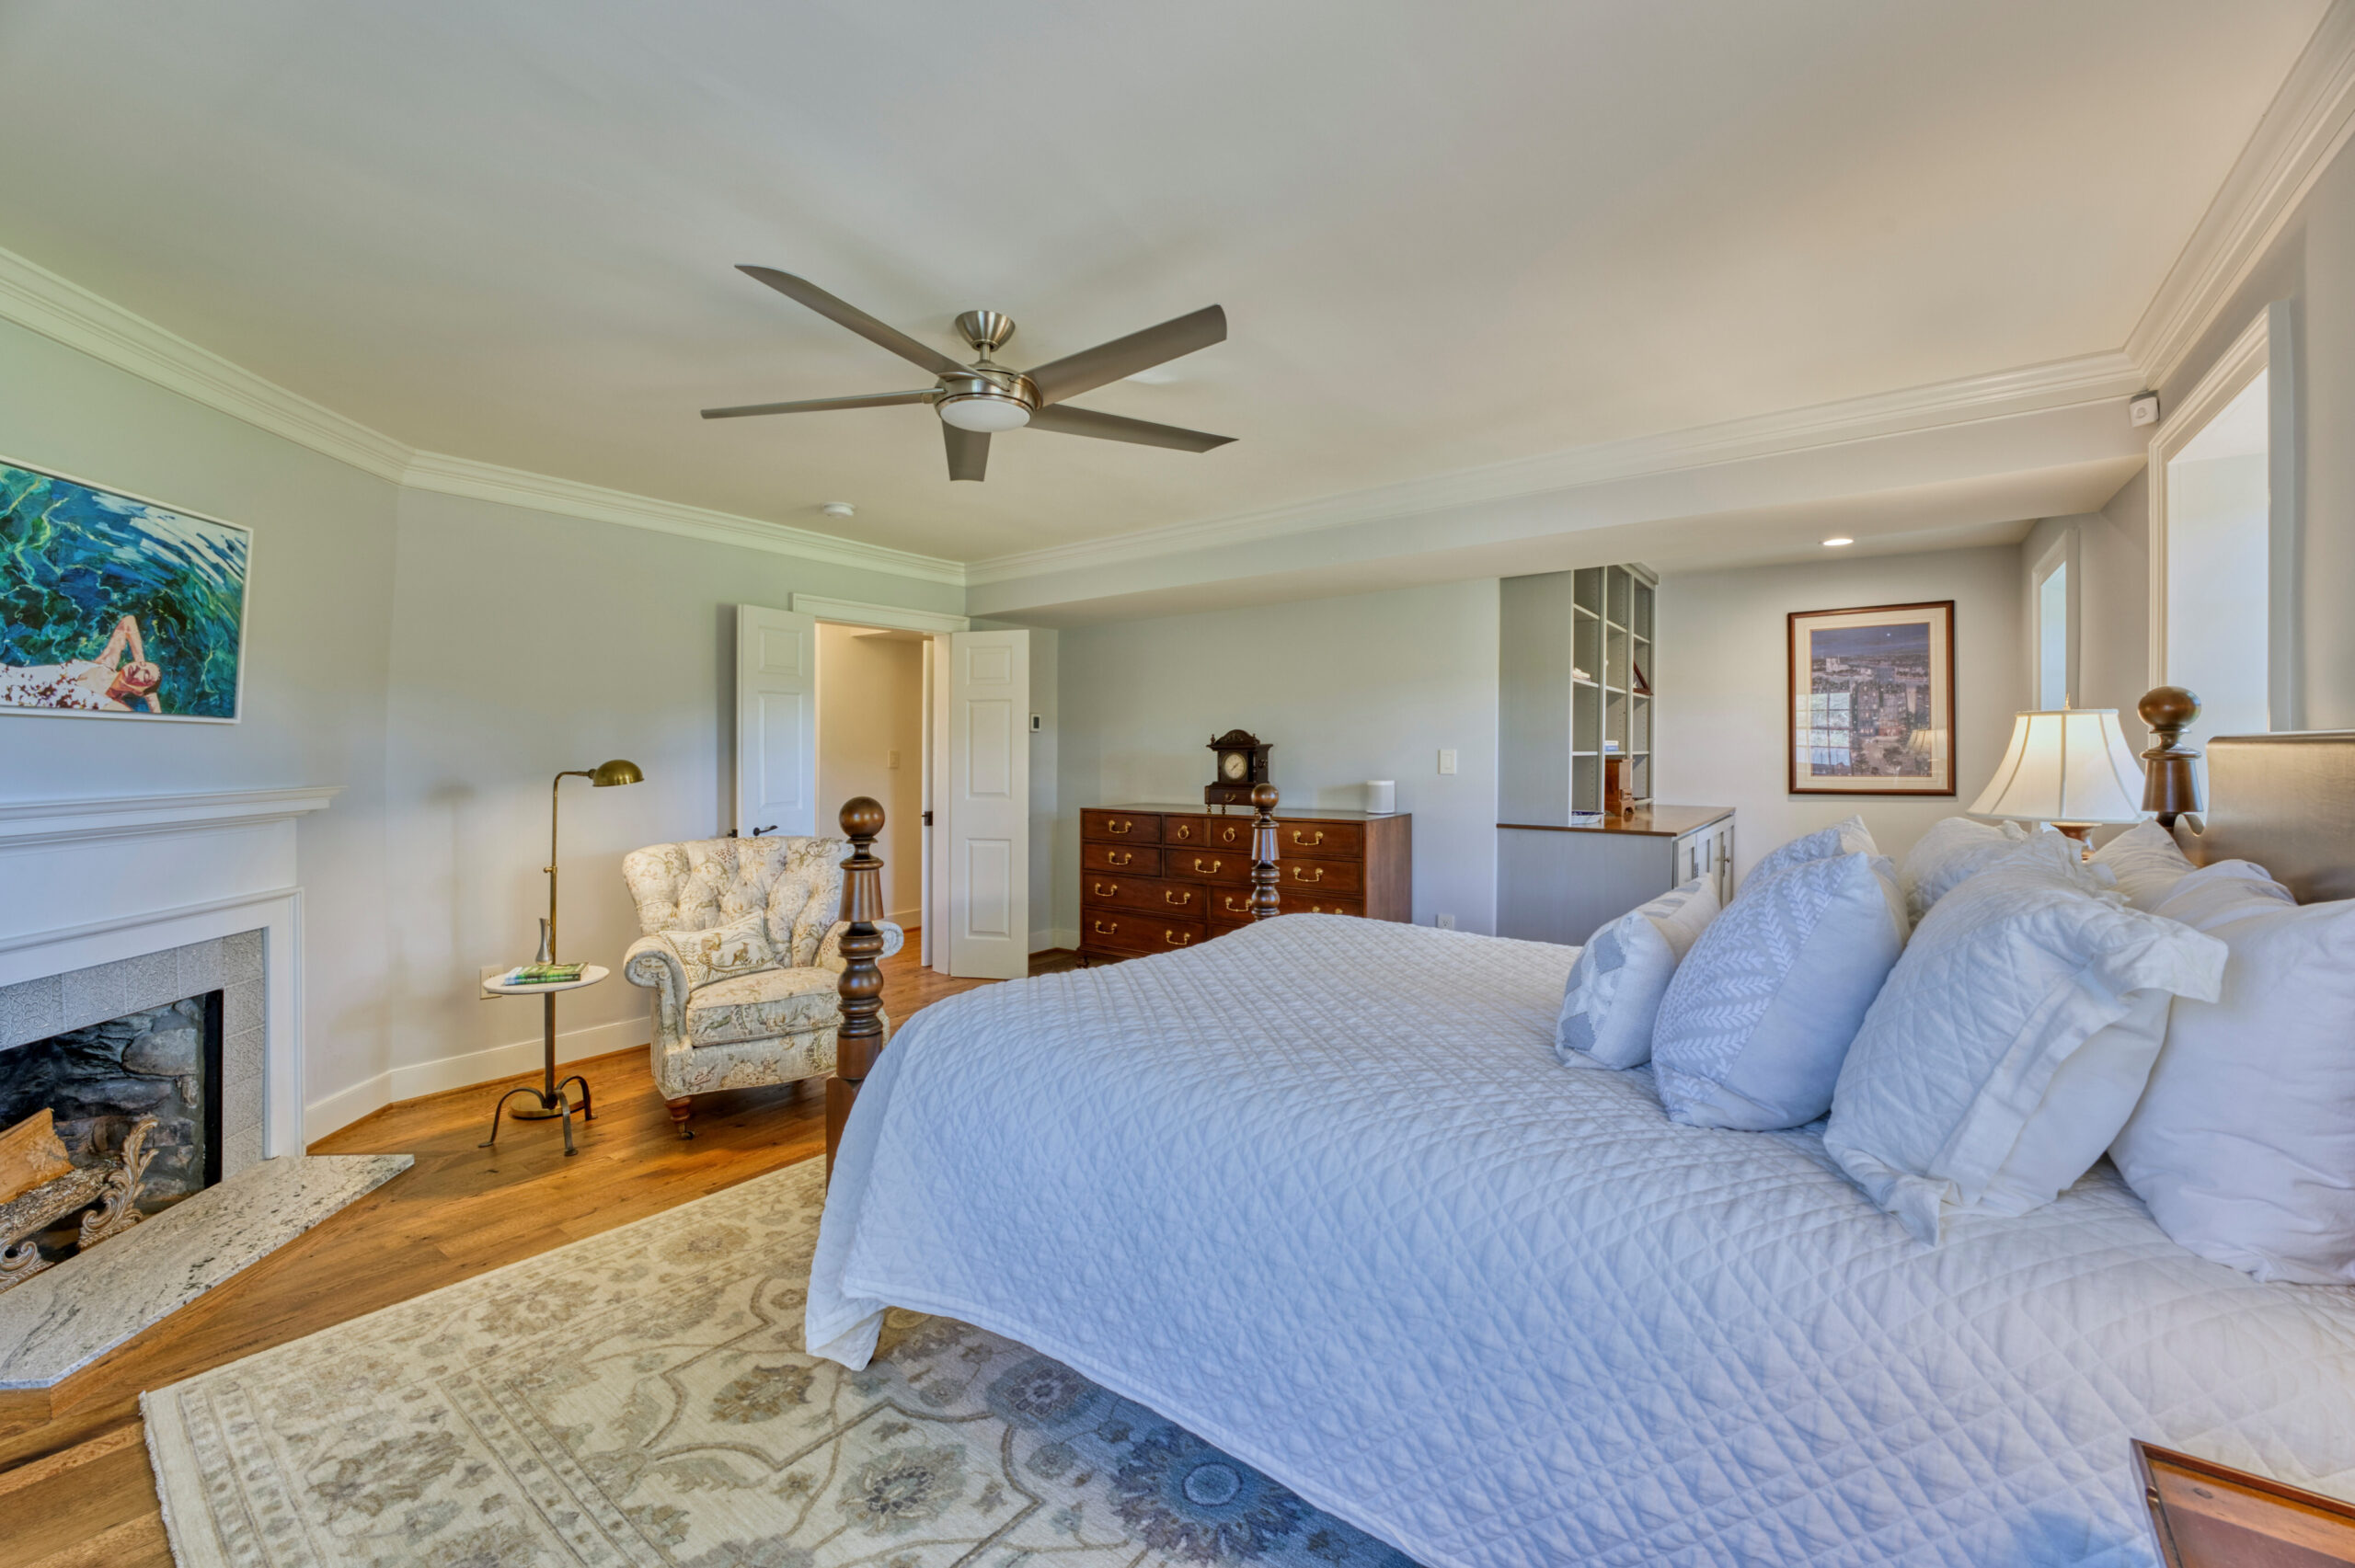 Professional interior photo of main house of Historic Hearthstone Manor: 35428 Appalachian Trail Rd, Round Hill, Virginia - showing master bedroom with fireplace, ceiling fan, and reading nook with built-in shelves in the background